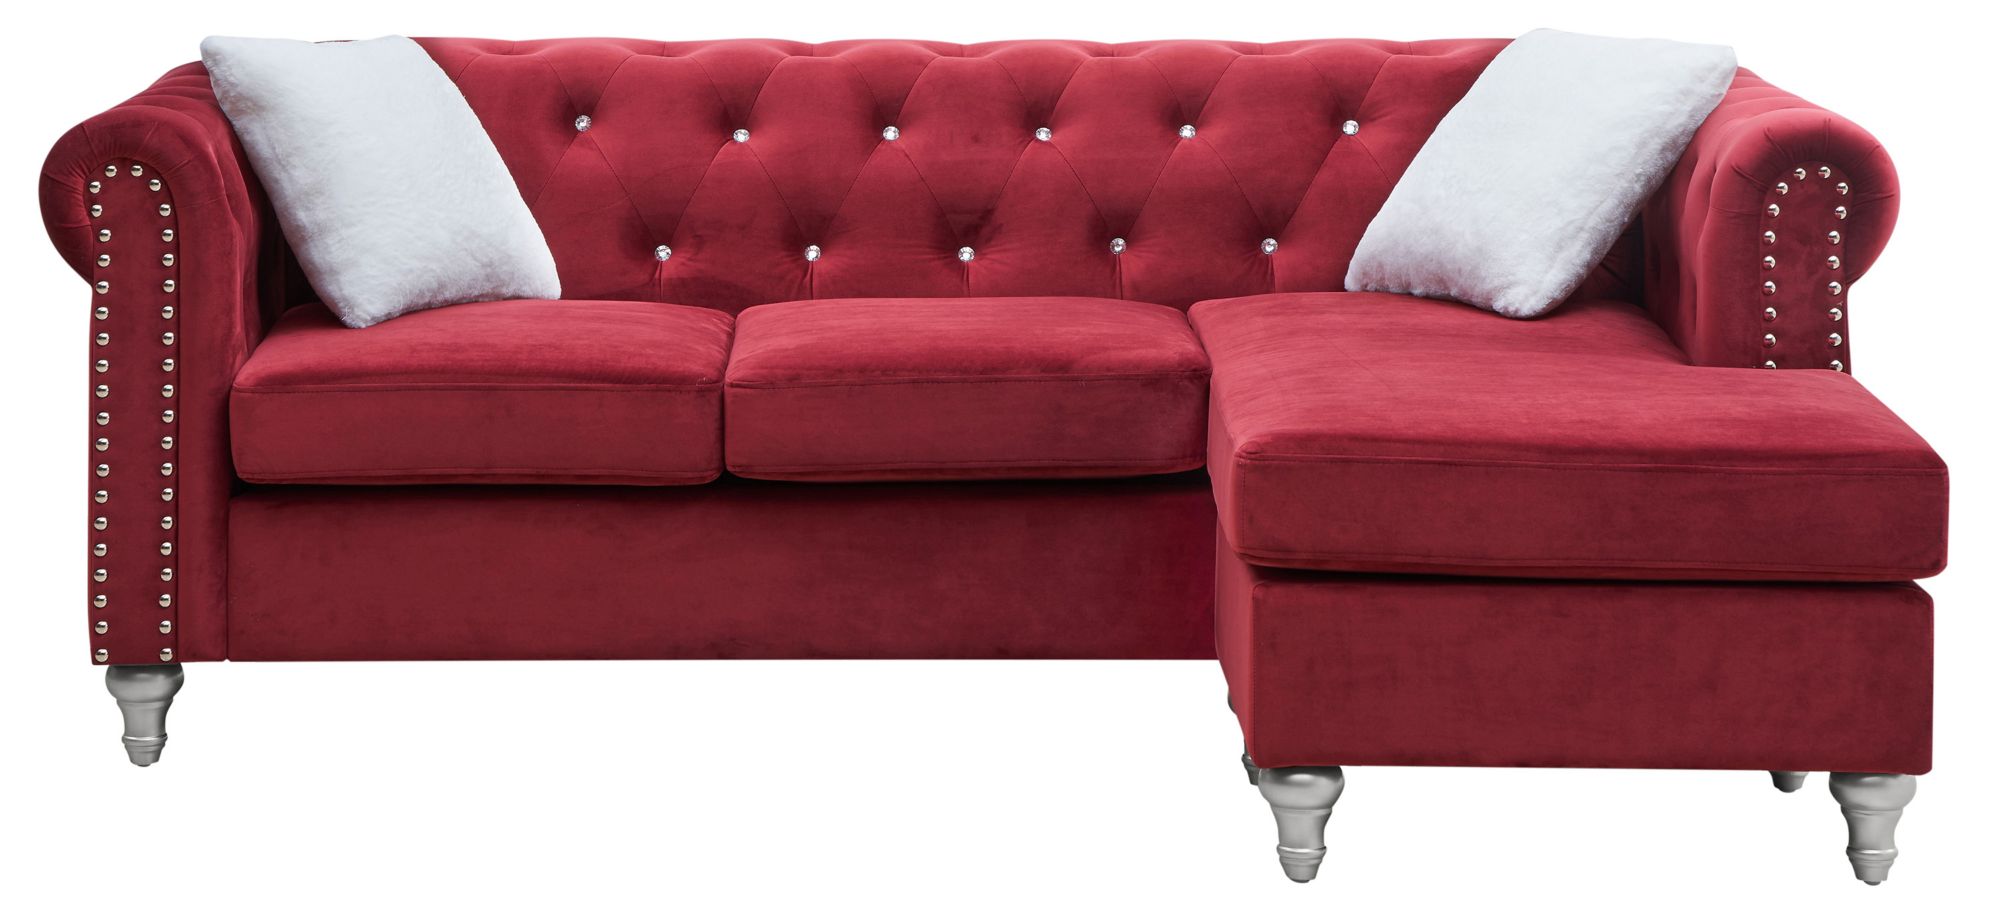 Raisa Sectional in Burgundy by Glory Furniture